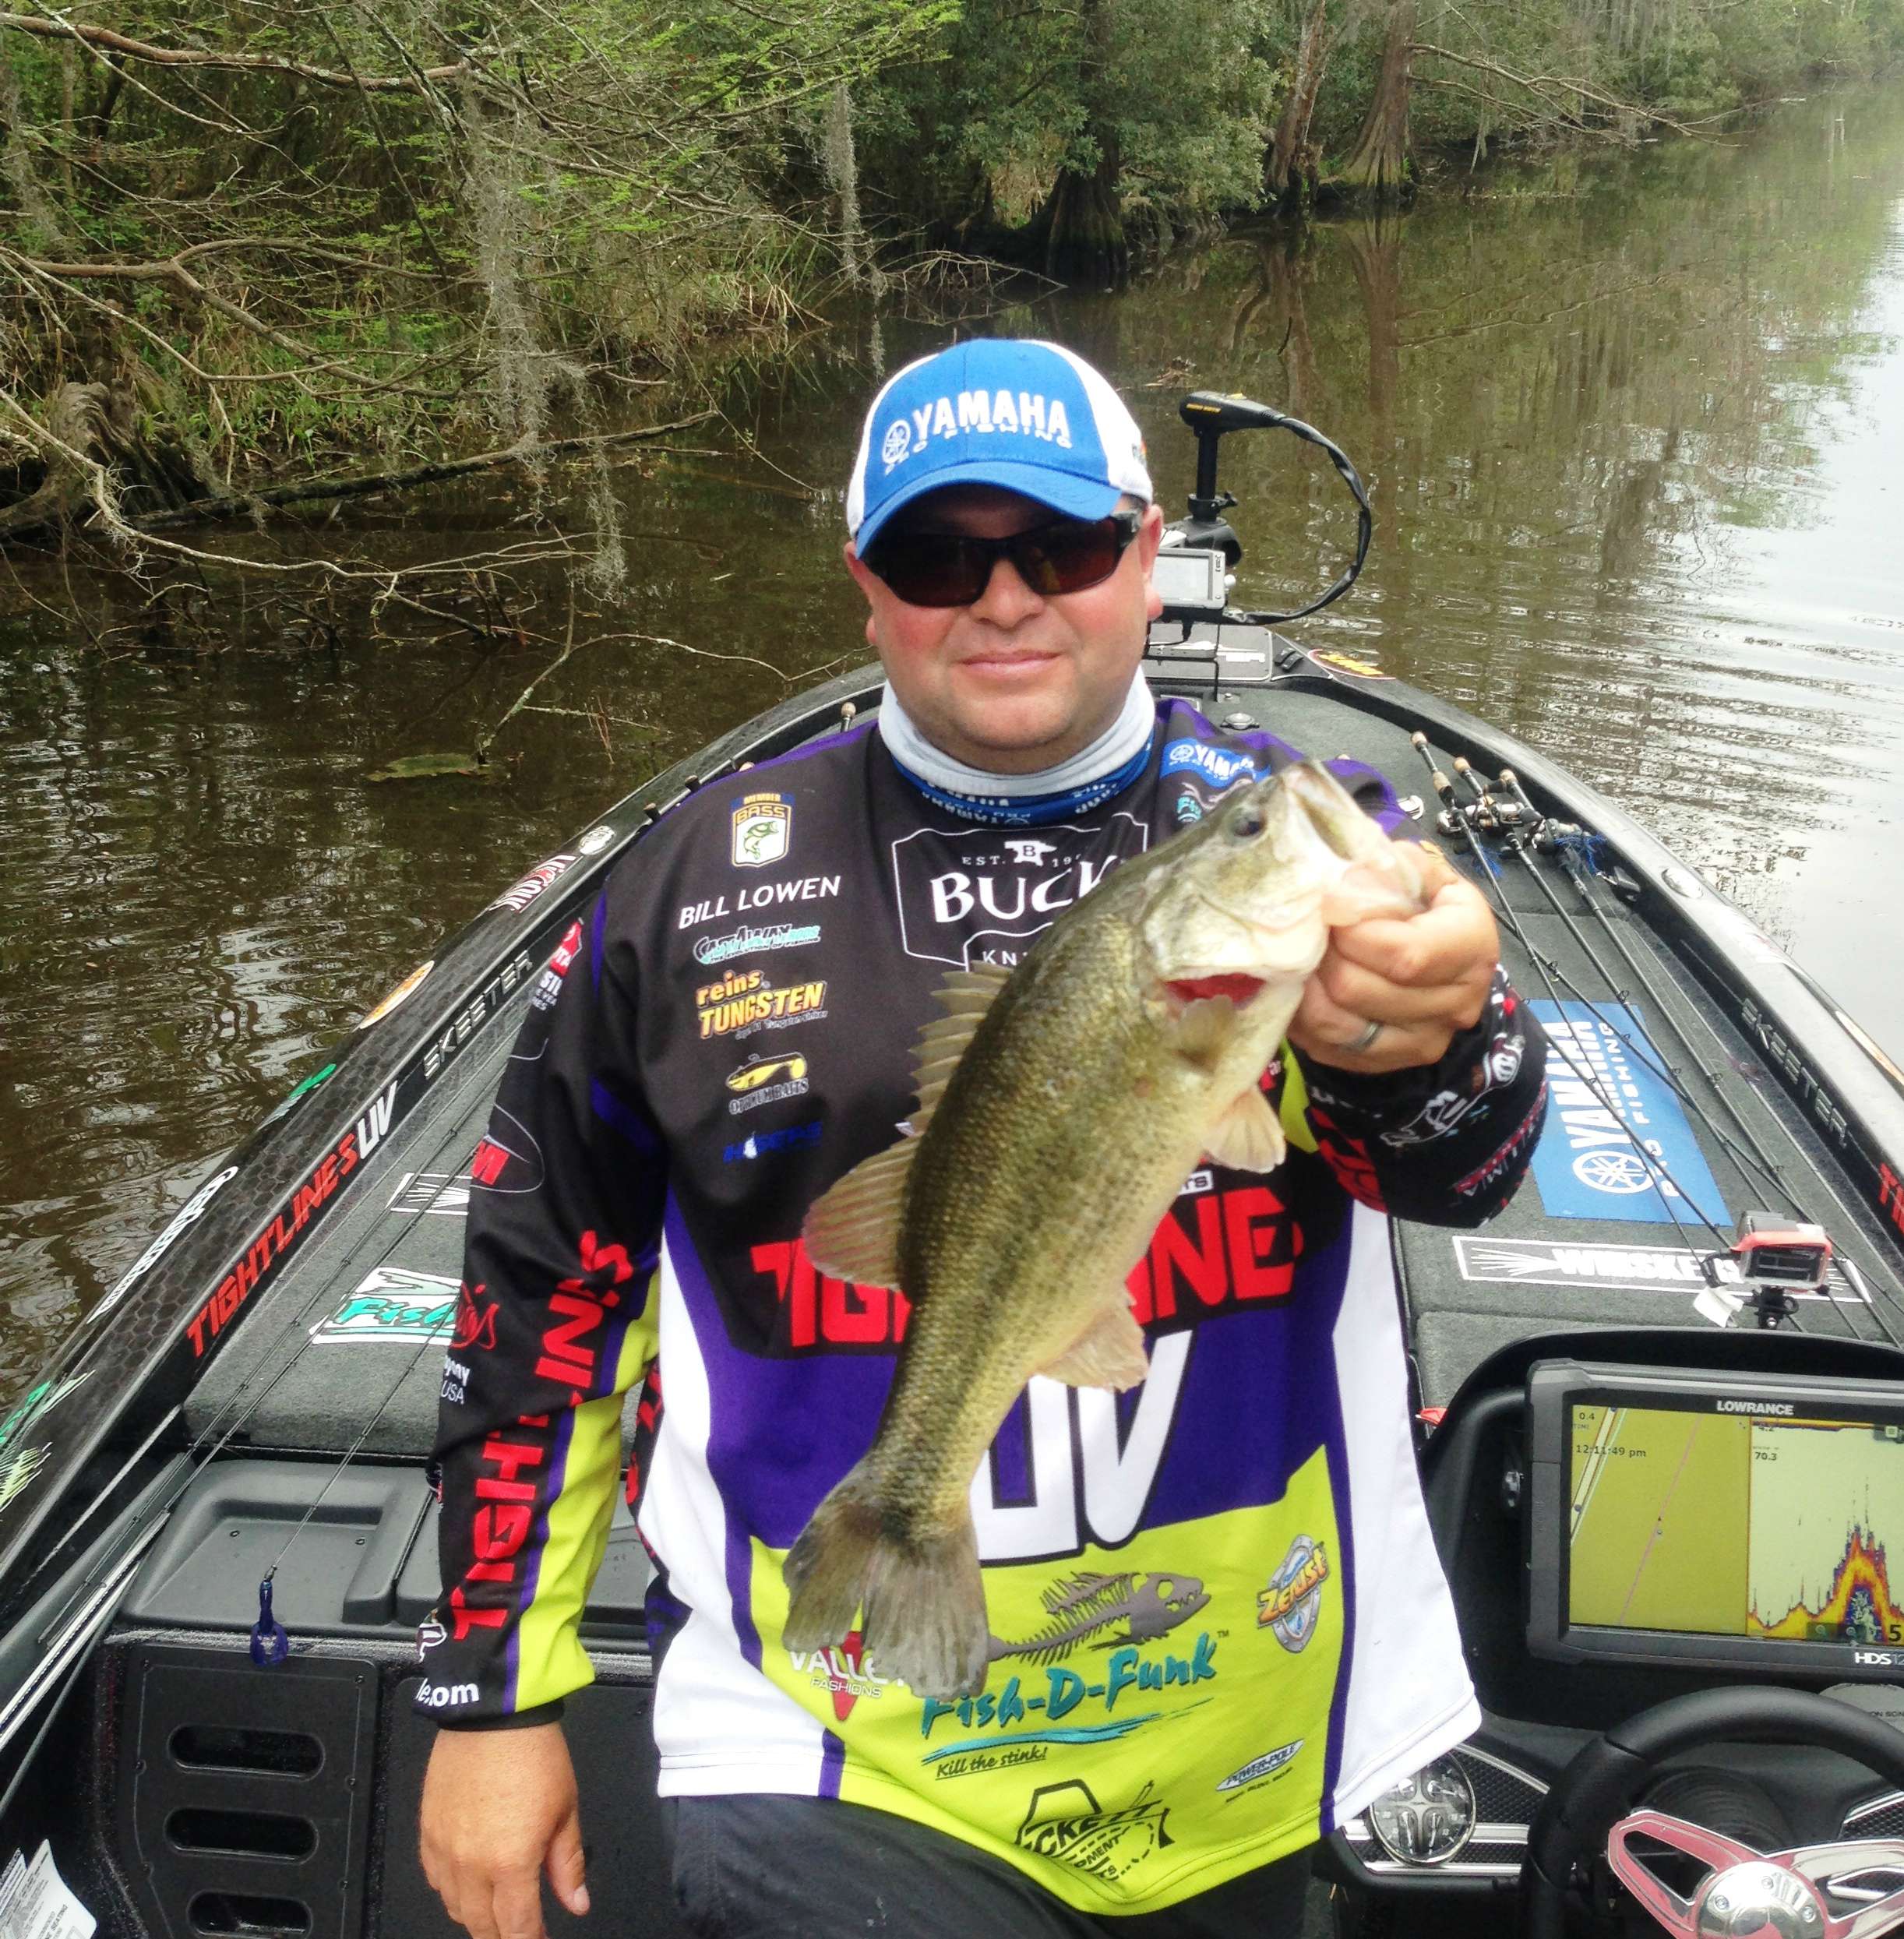 Lowen with keeper No. 4.
<br>Photo by Bassmaster Marshal Austin Peloquin